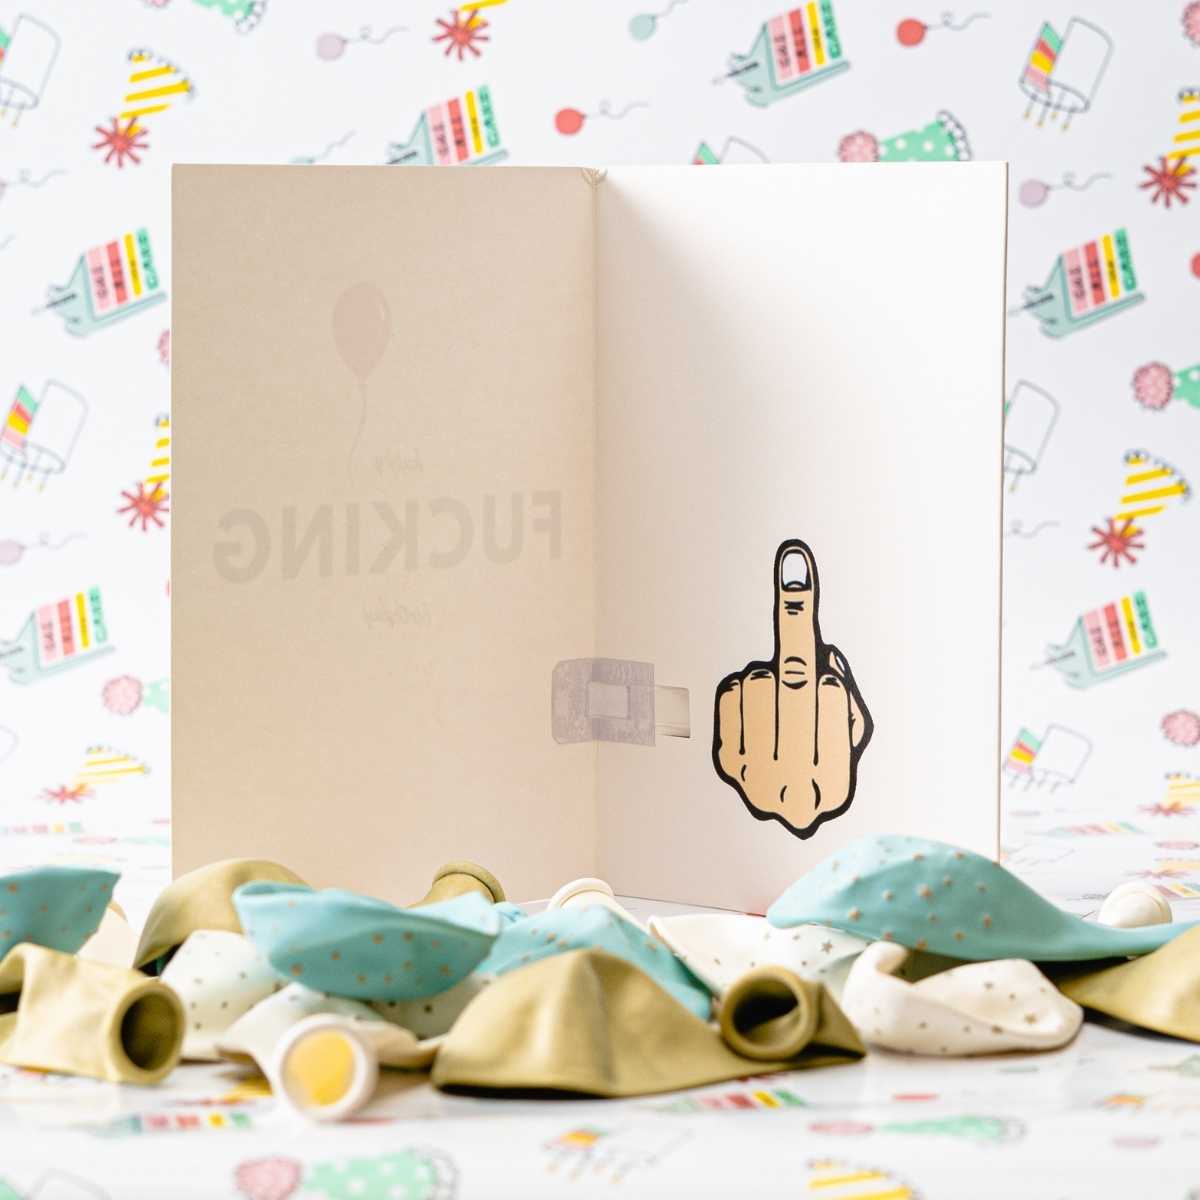 Happy Fucking Birthday To You! Prank Song Card Pranks Anonymous send hilarious pranks and gag gifts to your friends or family.